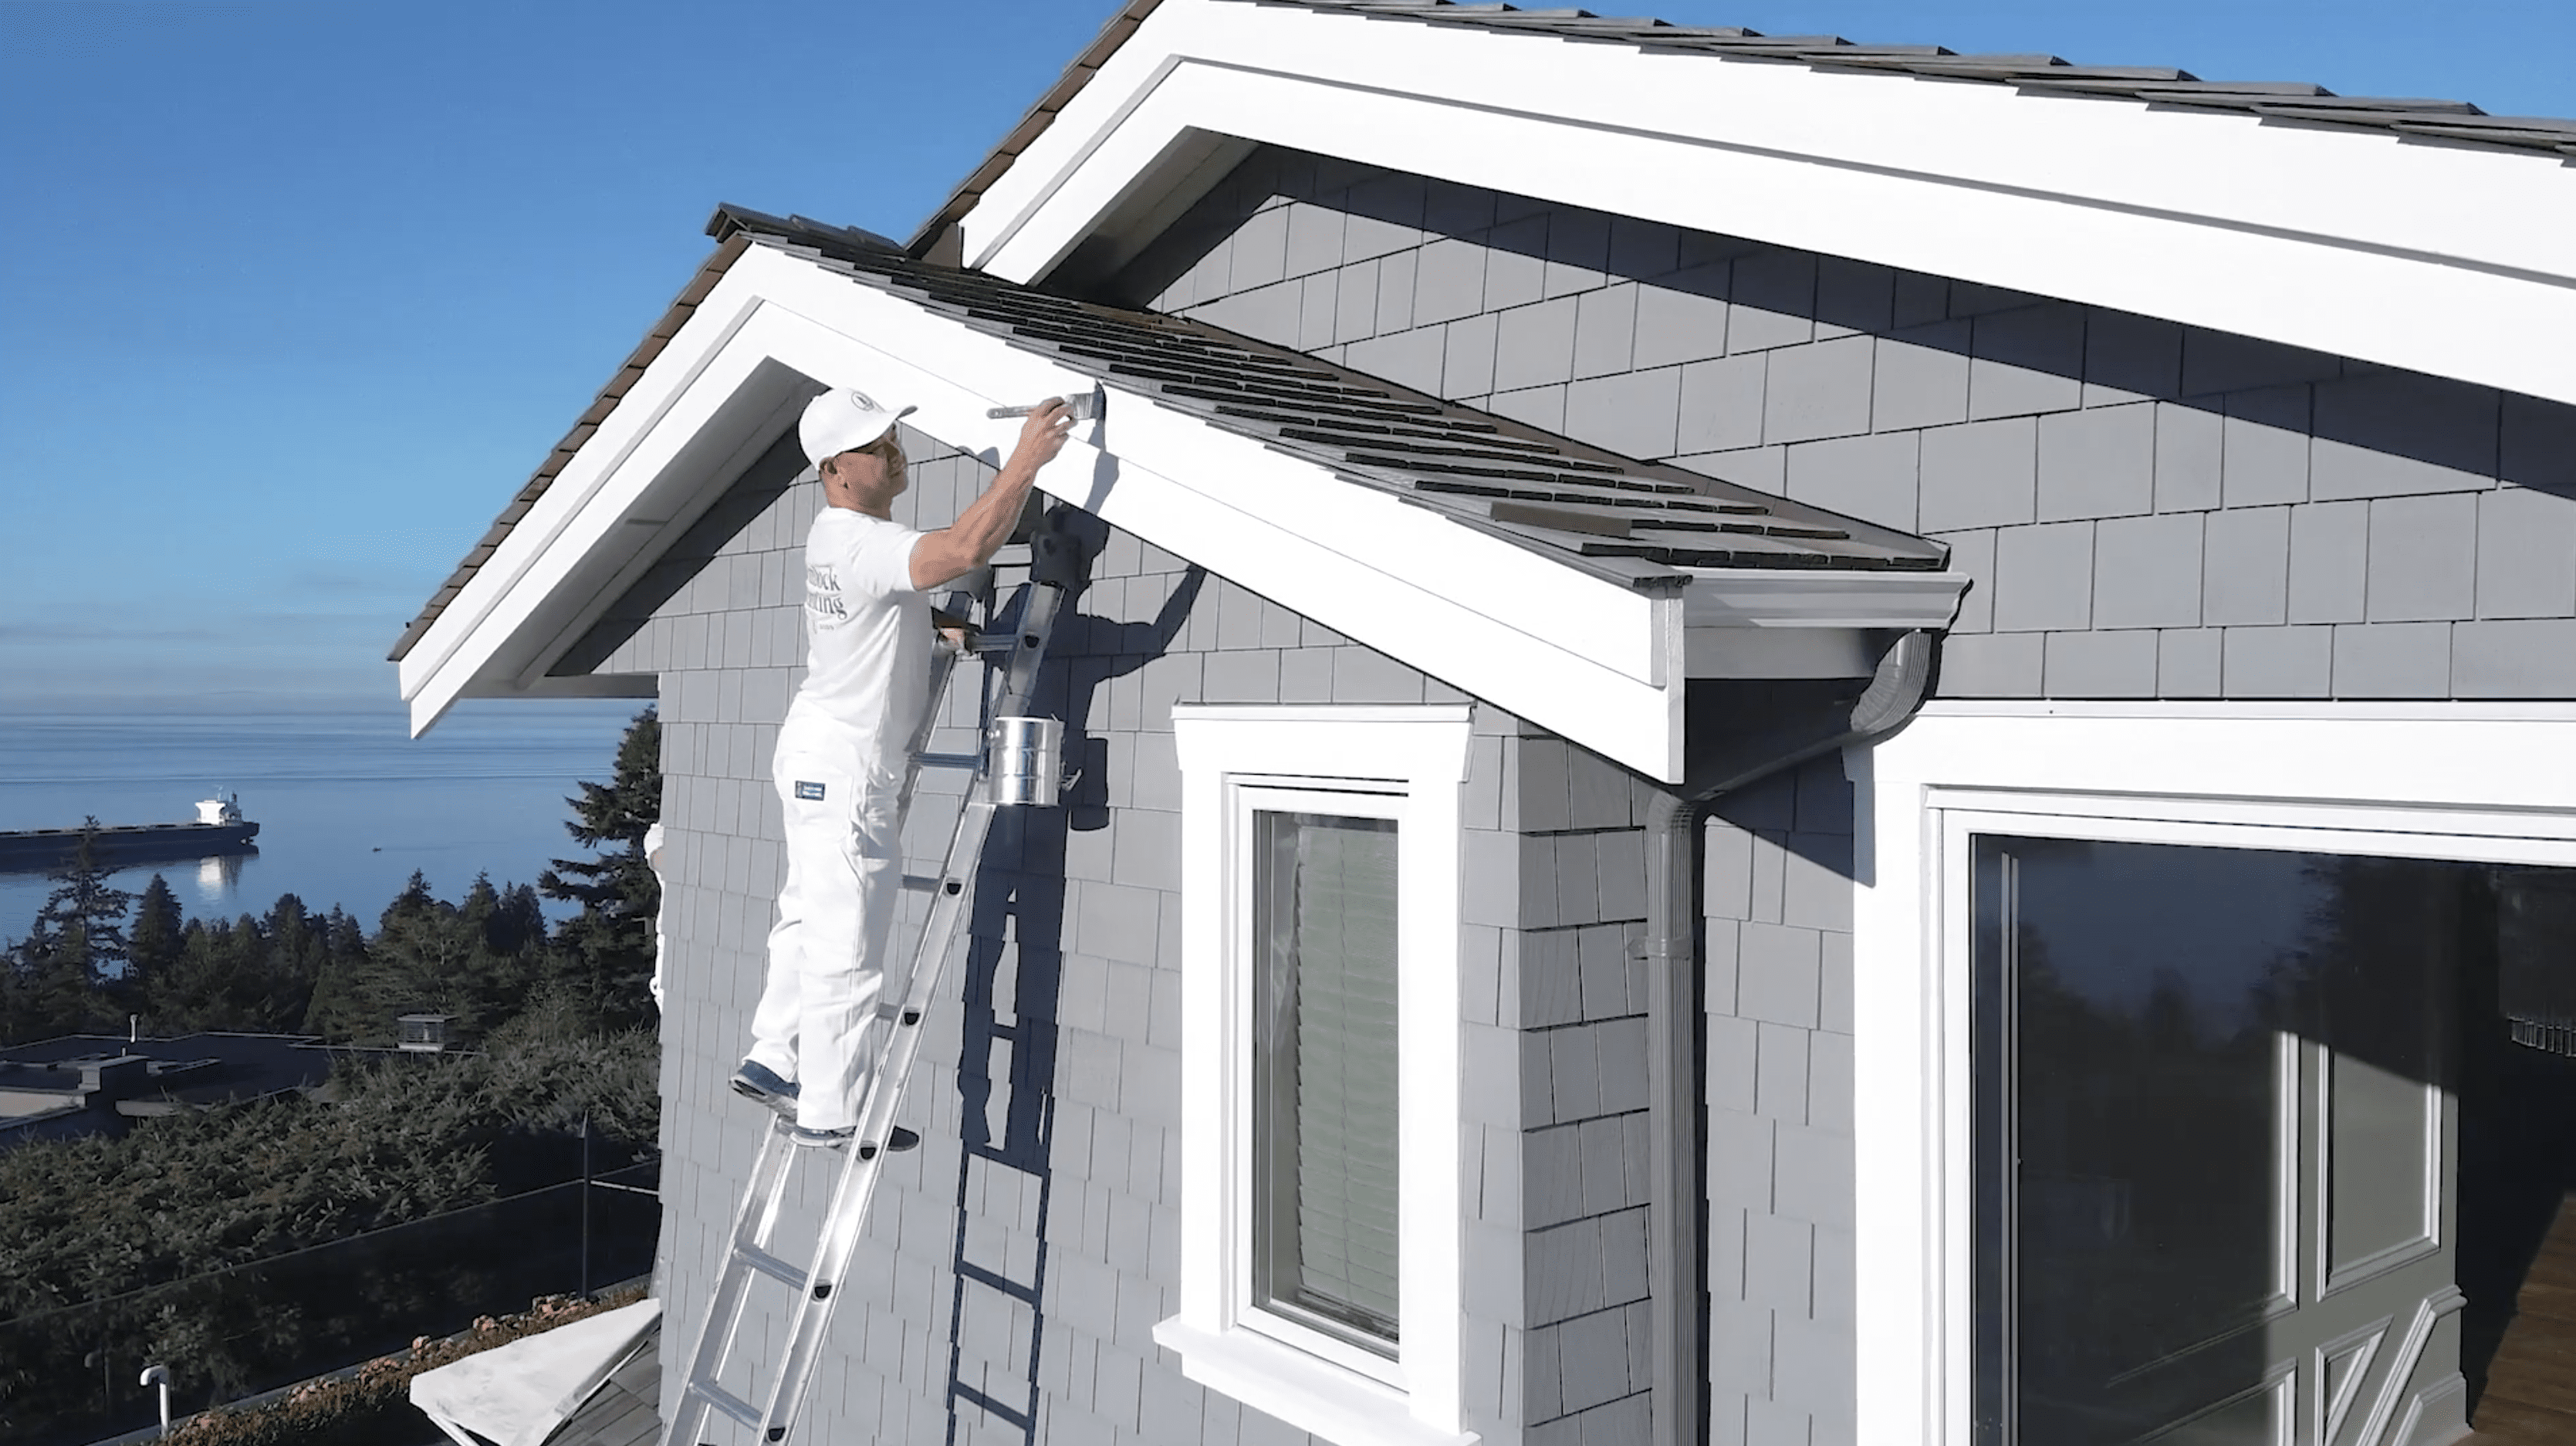 A Hemlock Painting crew member paints an exterior area below the roof of a house.